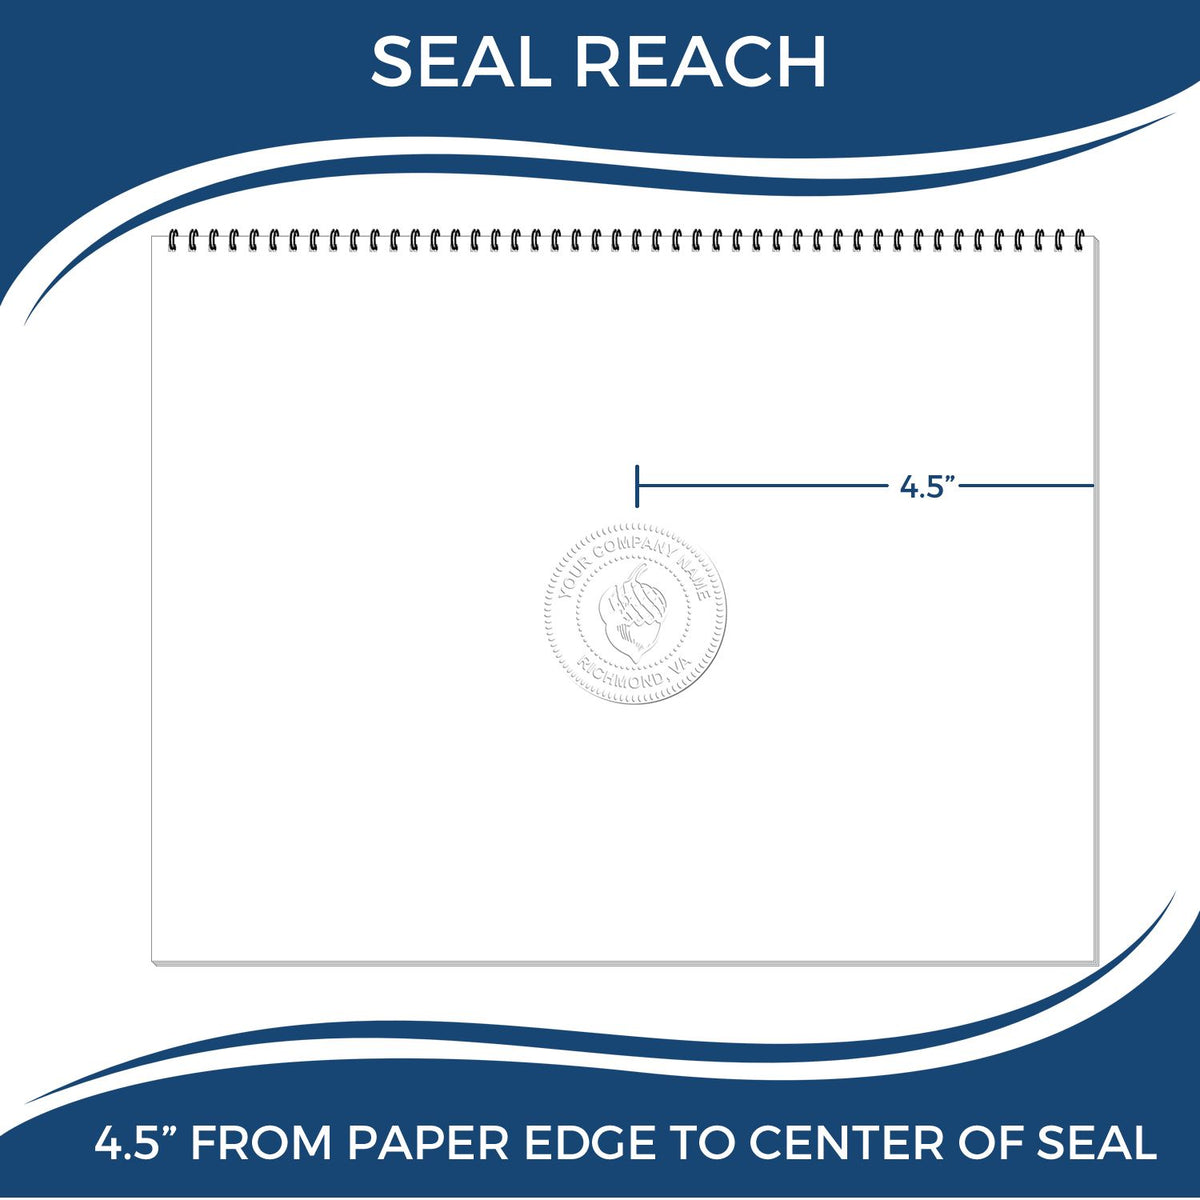 An infographic showing the seal reach which is represented by a ruler and a miniature seal image of the Extended Long Reach Minnesota Architect Seal Embosser